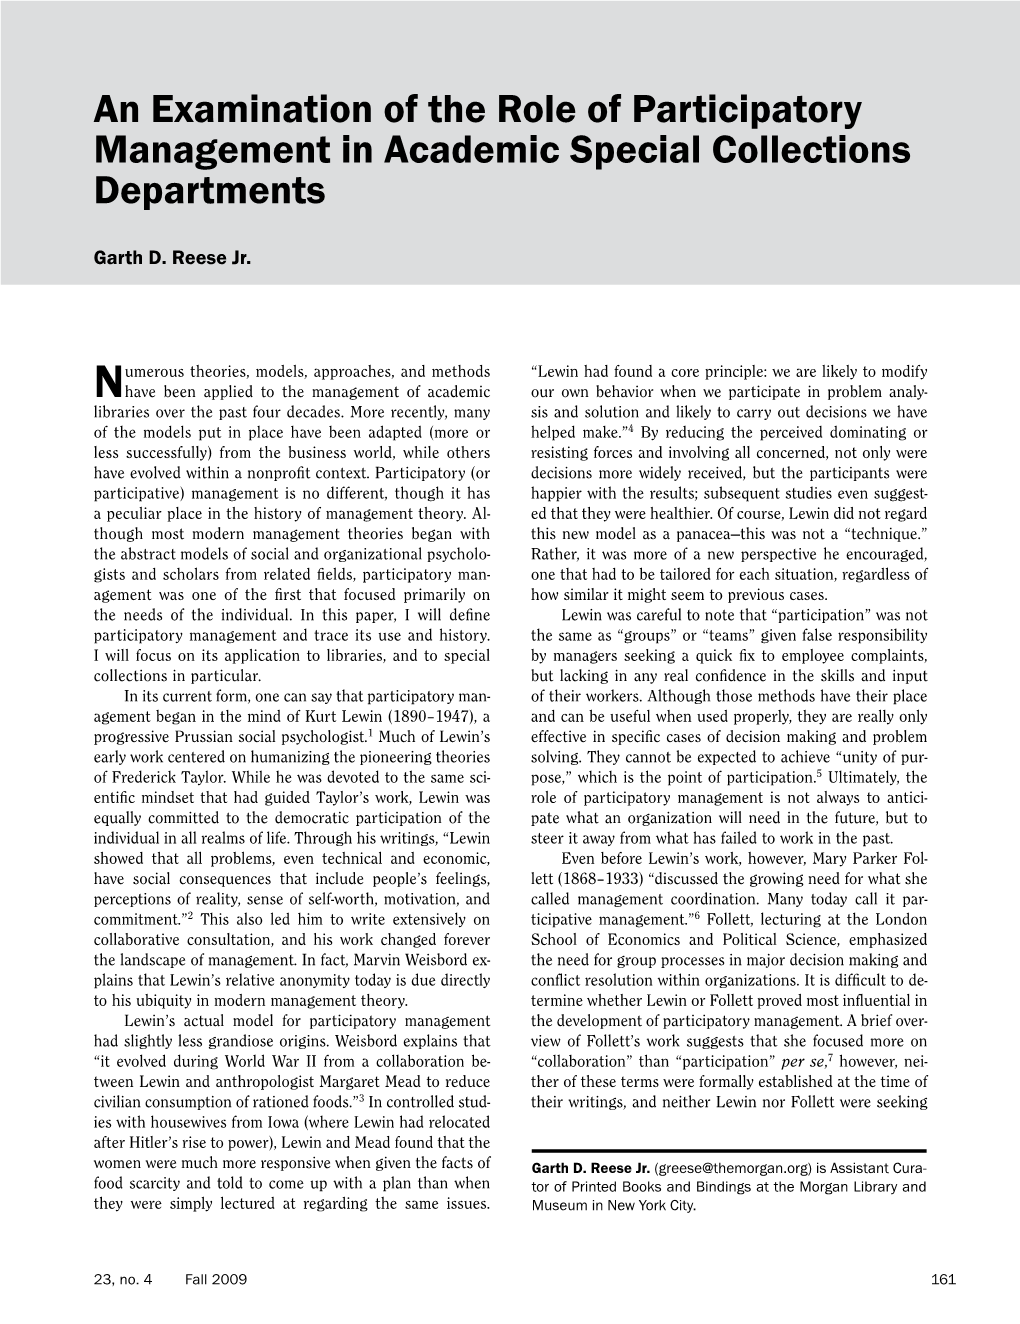 An Examination of the Role of Participatory Management in Academic Special Collections Departments